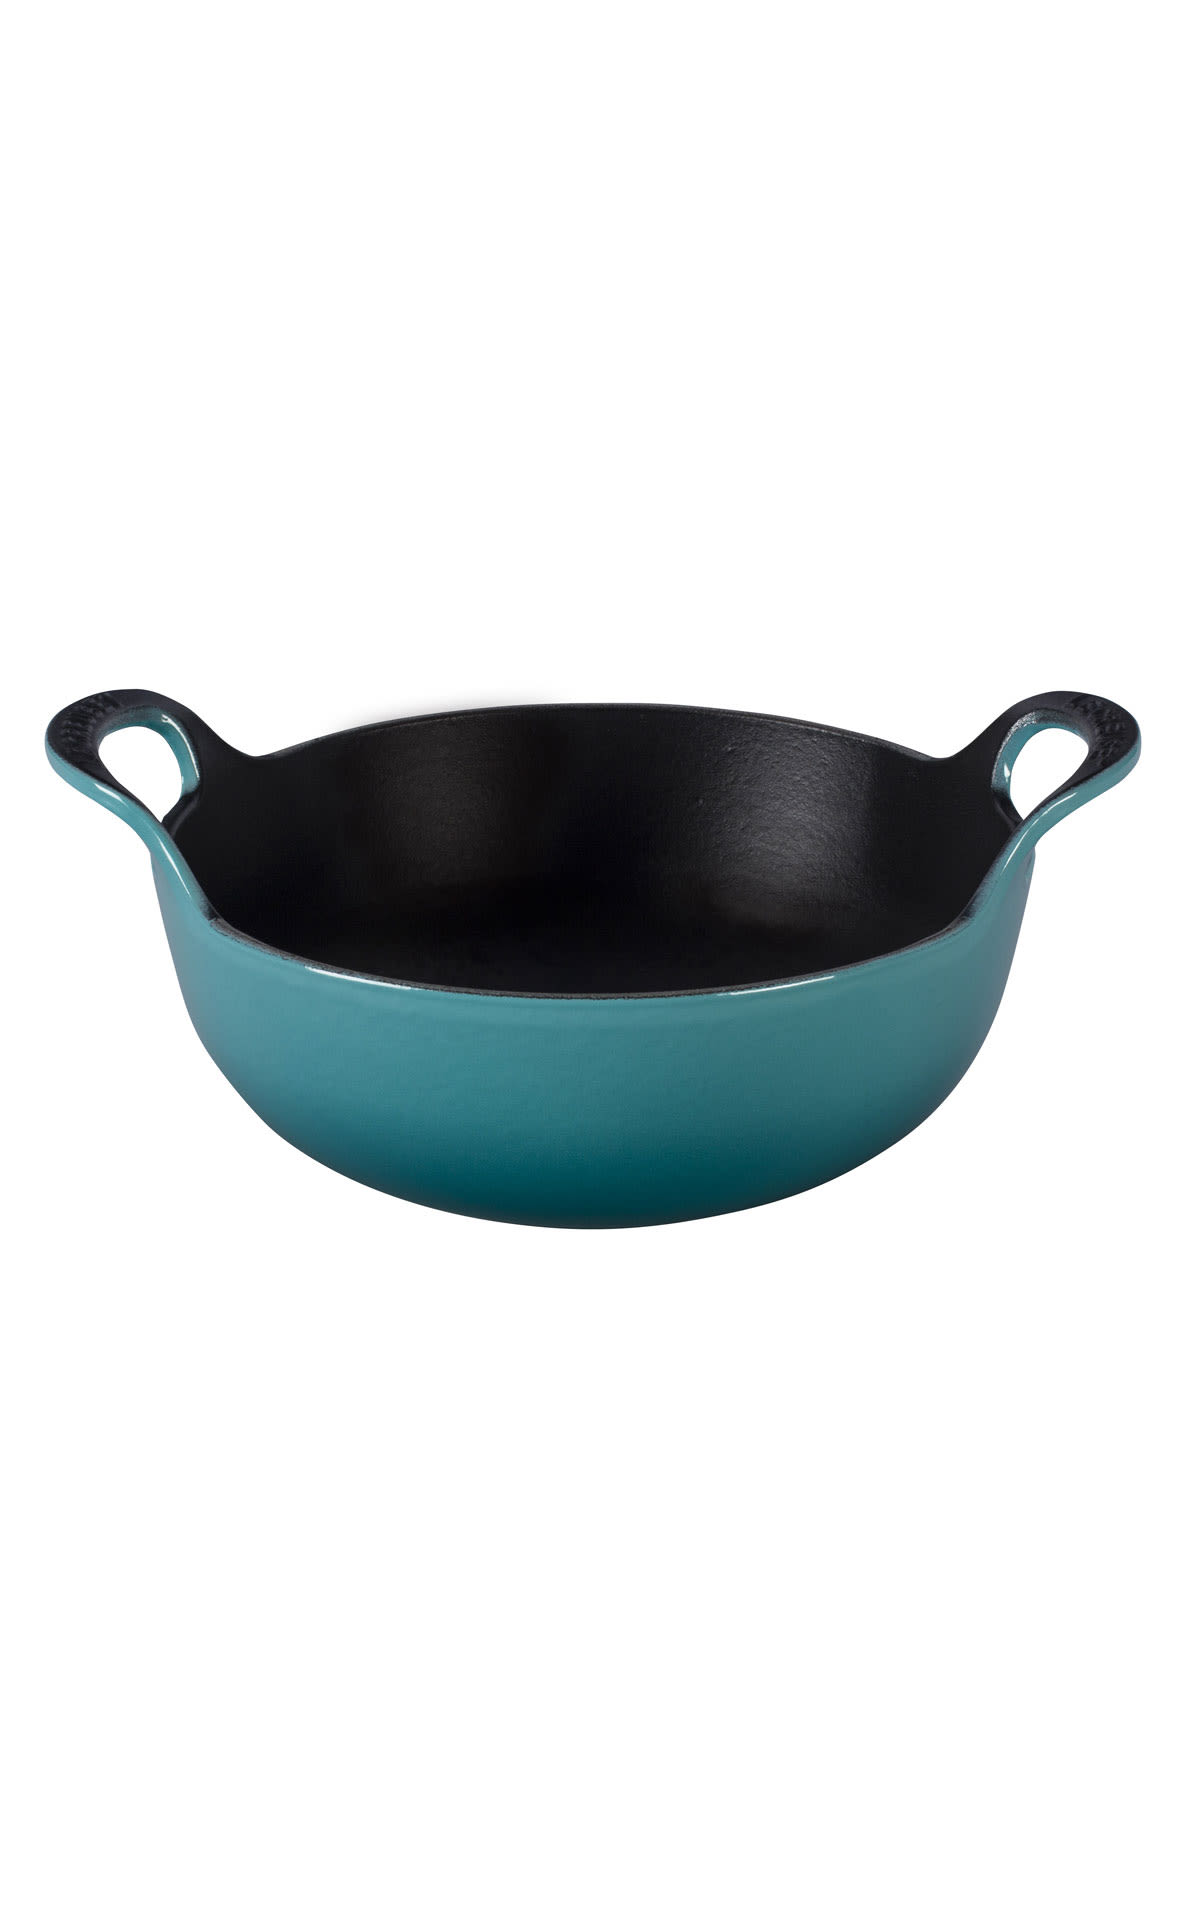 Le Creuset 20cm balti dish teal from Bicester Village